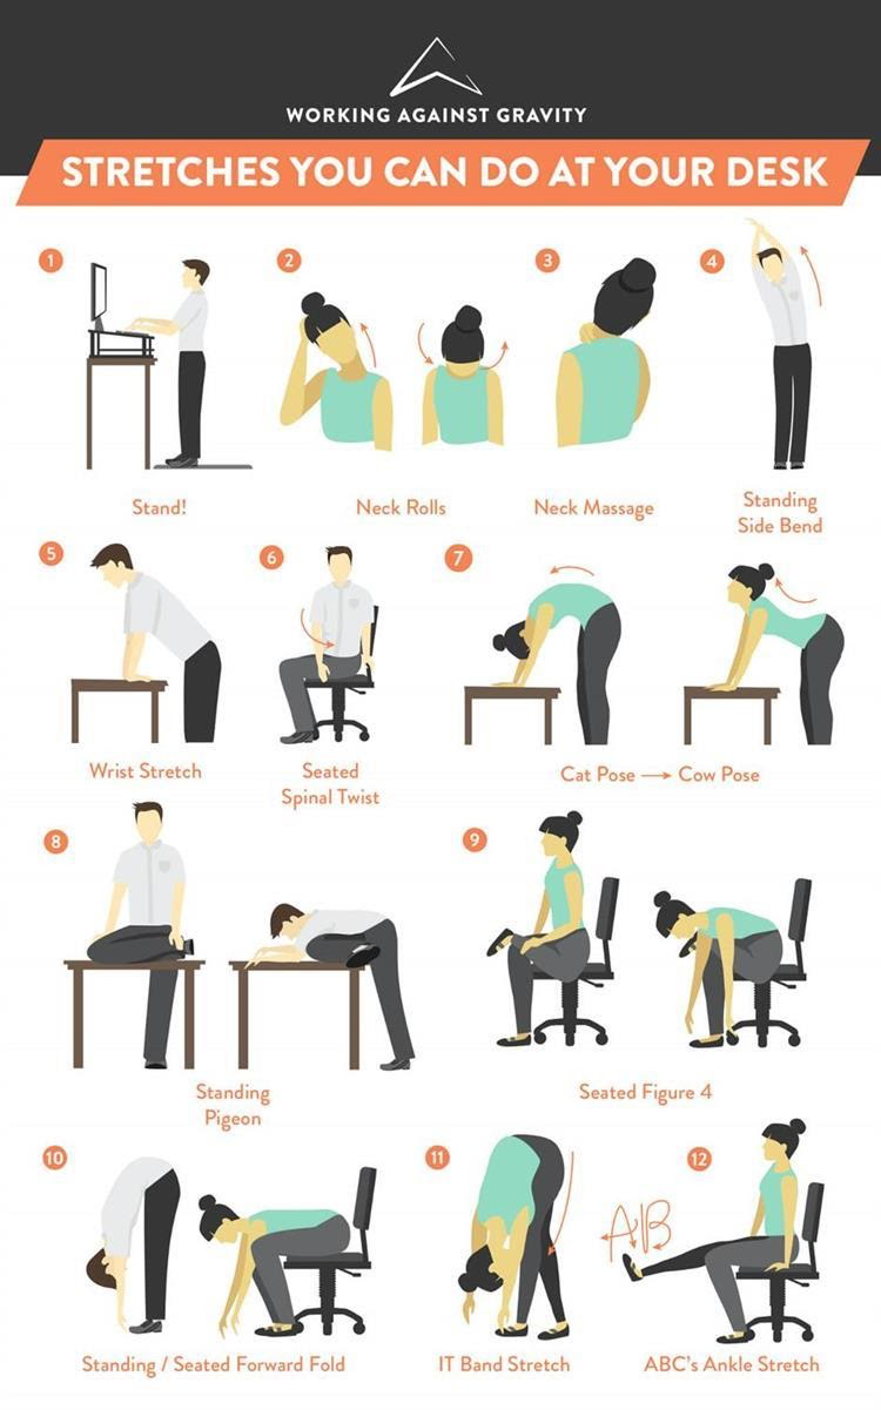 9 Desk Stretches for People Who Sit All Day